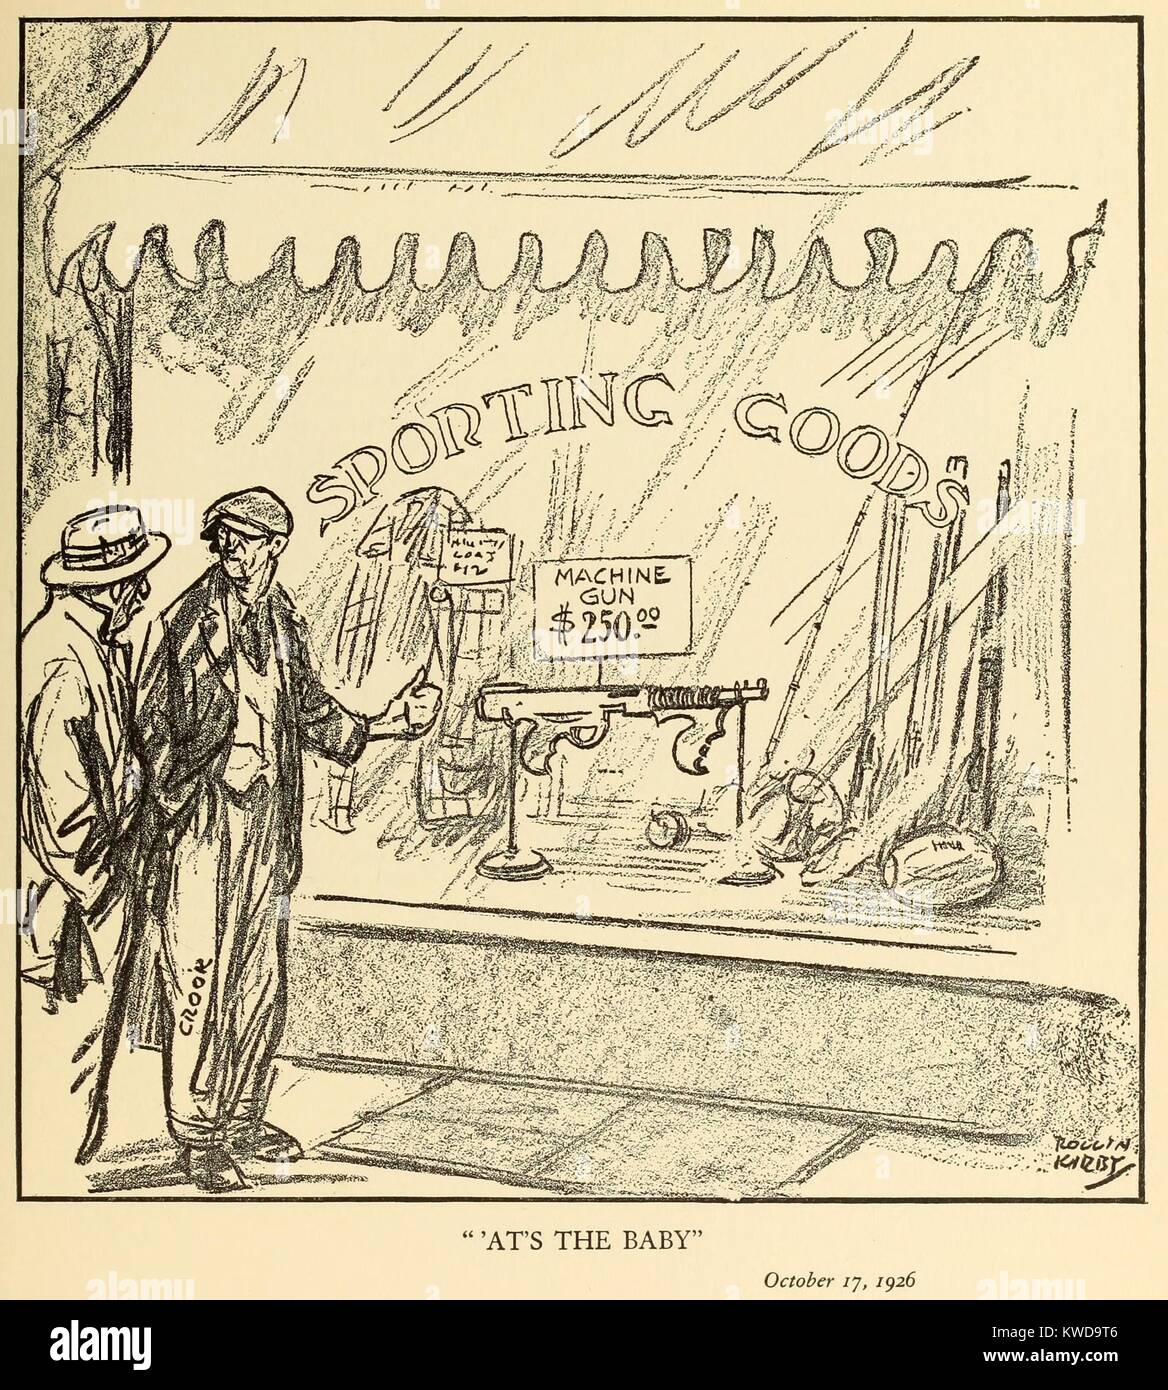 AT'S THE BABY, Oct. 17, 1926, by Rollin Kirby, NEW YORK WORLD. A man labeled 'Crook' points to a machine gun in the window of a 'Sporting Goods' store (BSLOC 2016 10 70) Stock Photo